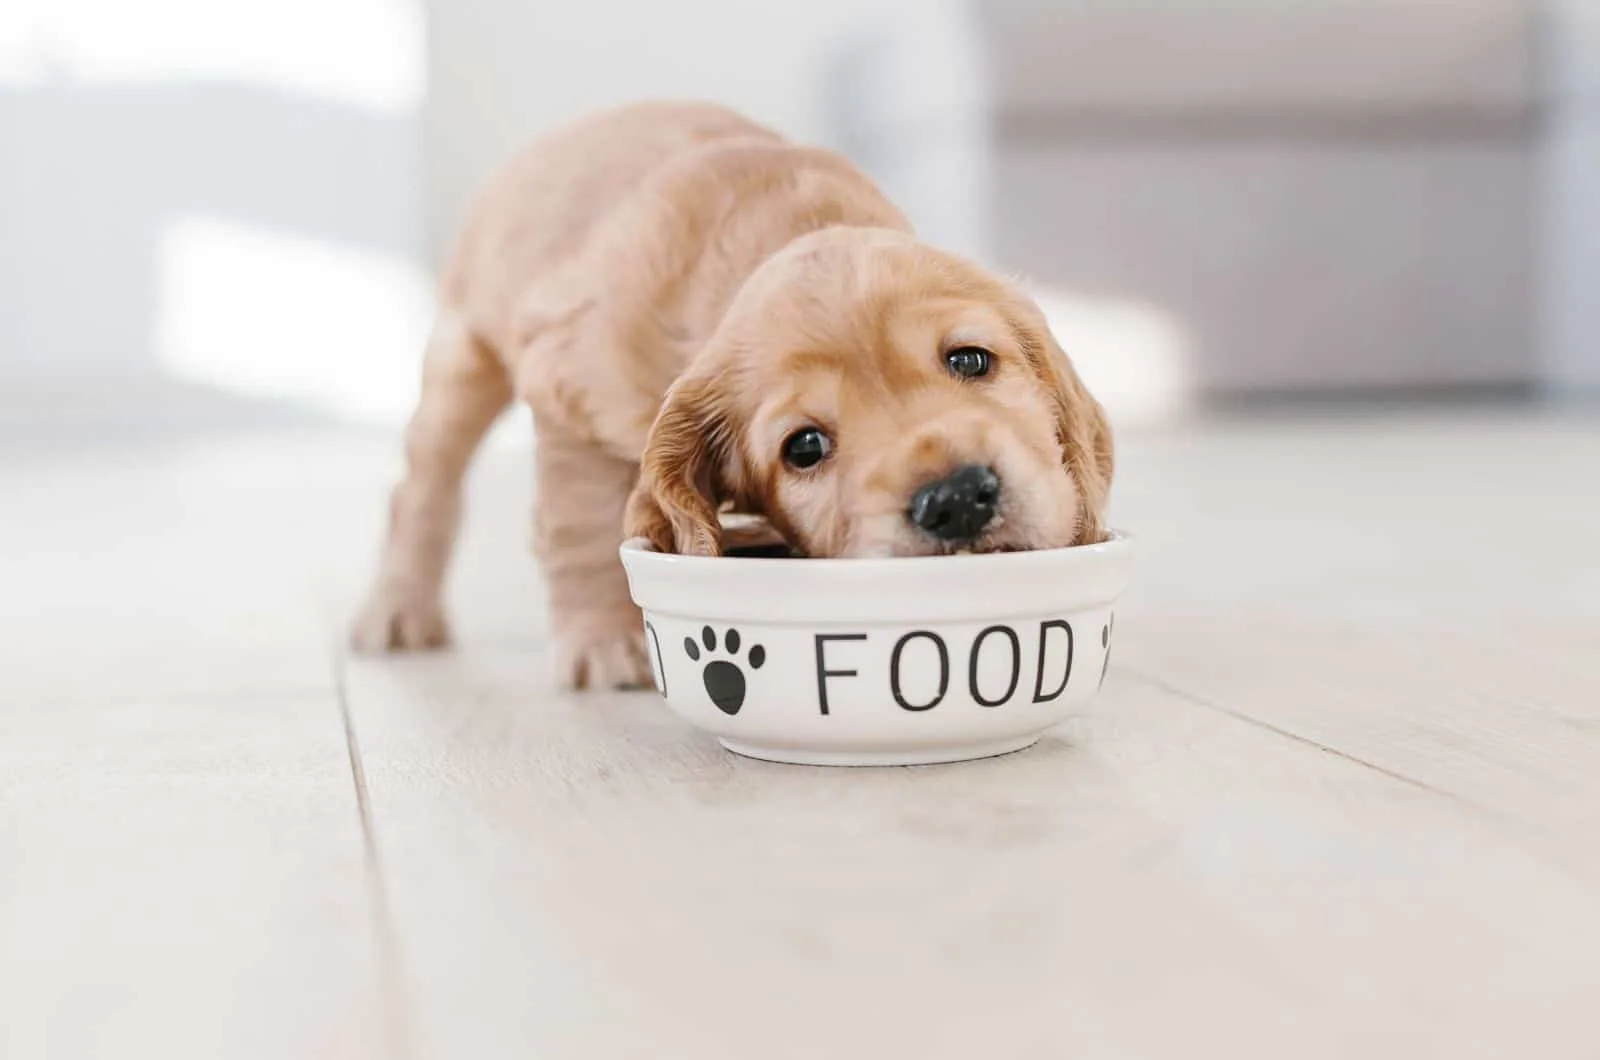 cute puppy eating from a bowl